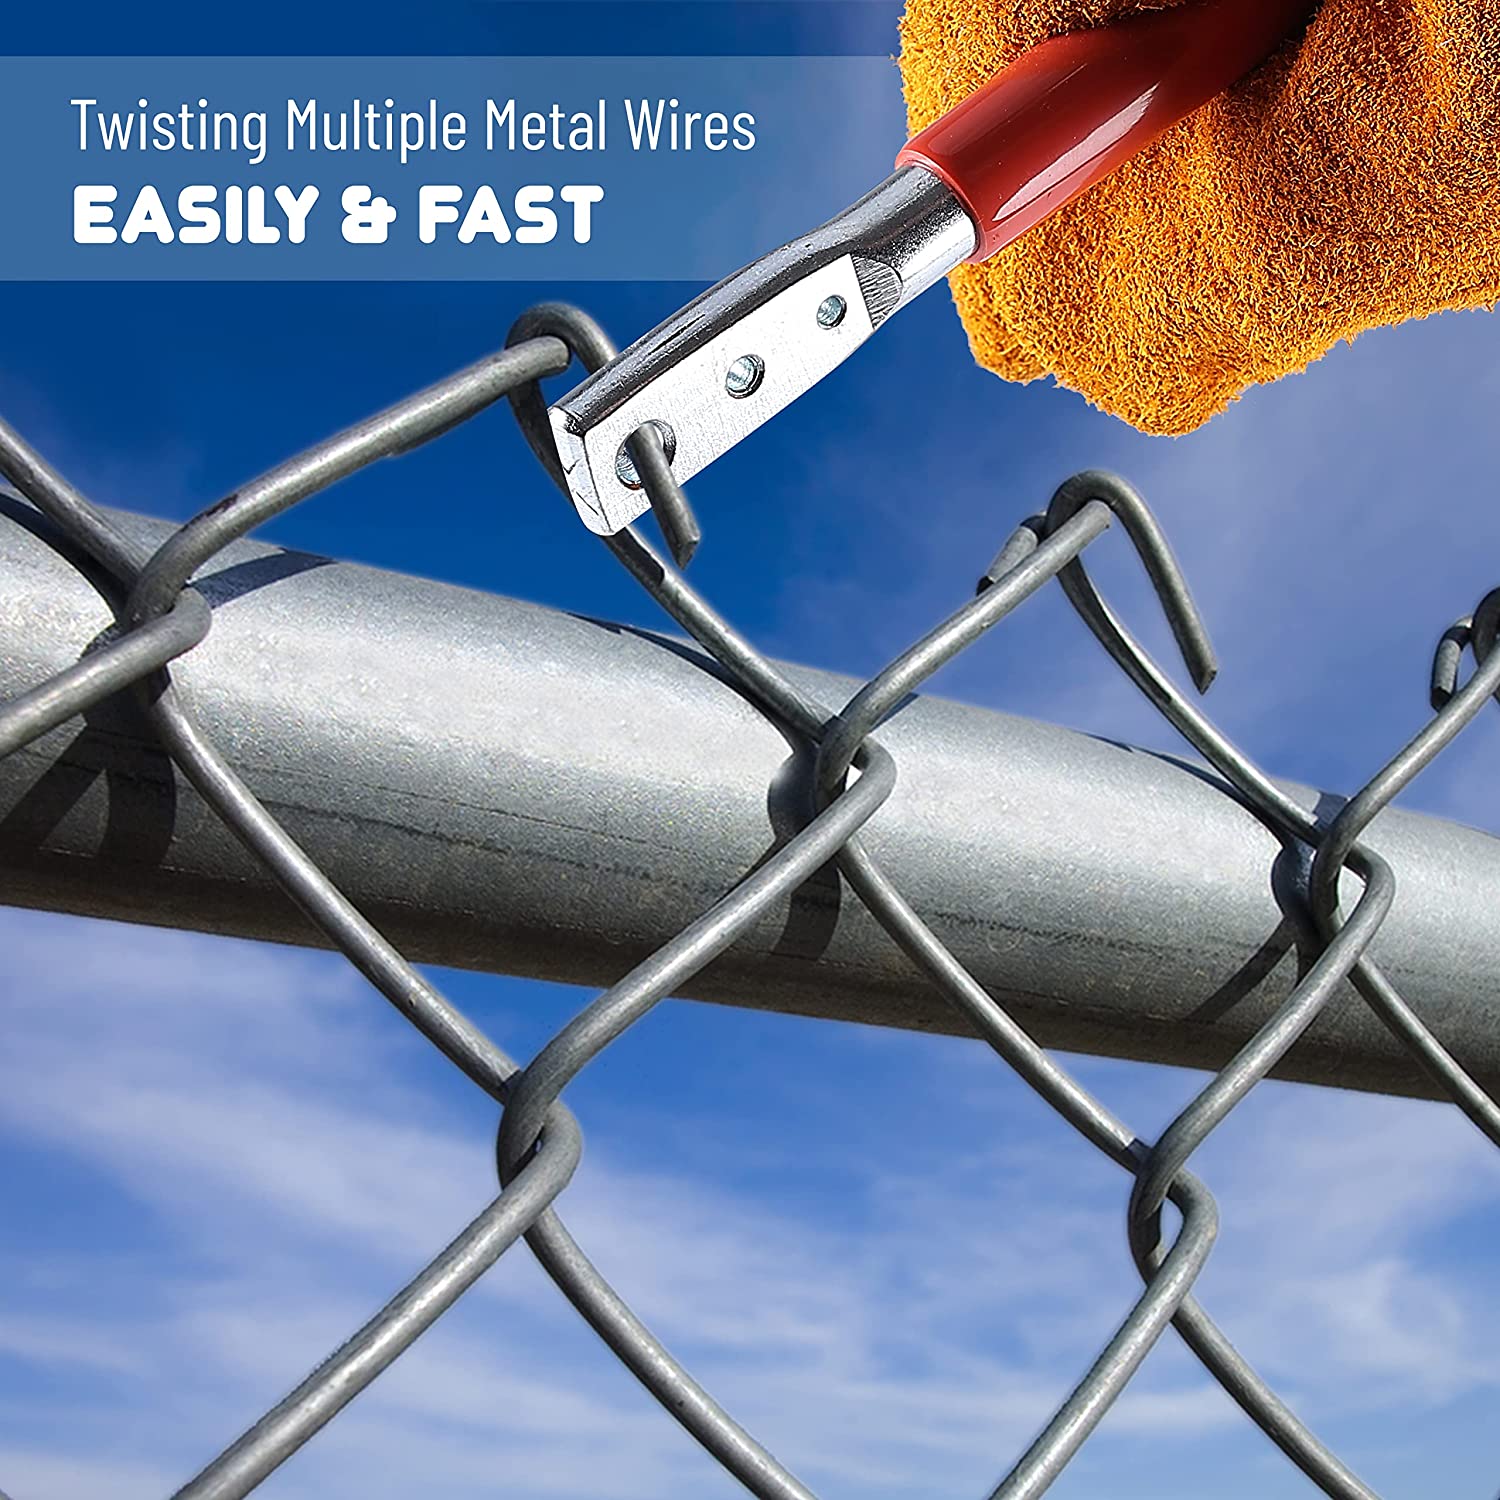 EASY TWIST FENCE TOOL for twisting and cutting wire - Drill Bit Warehouse